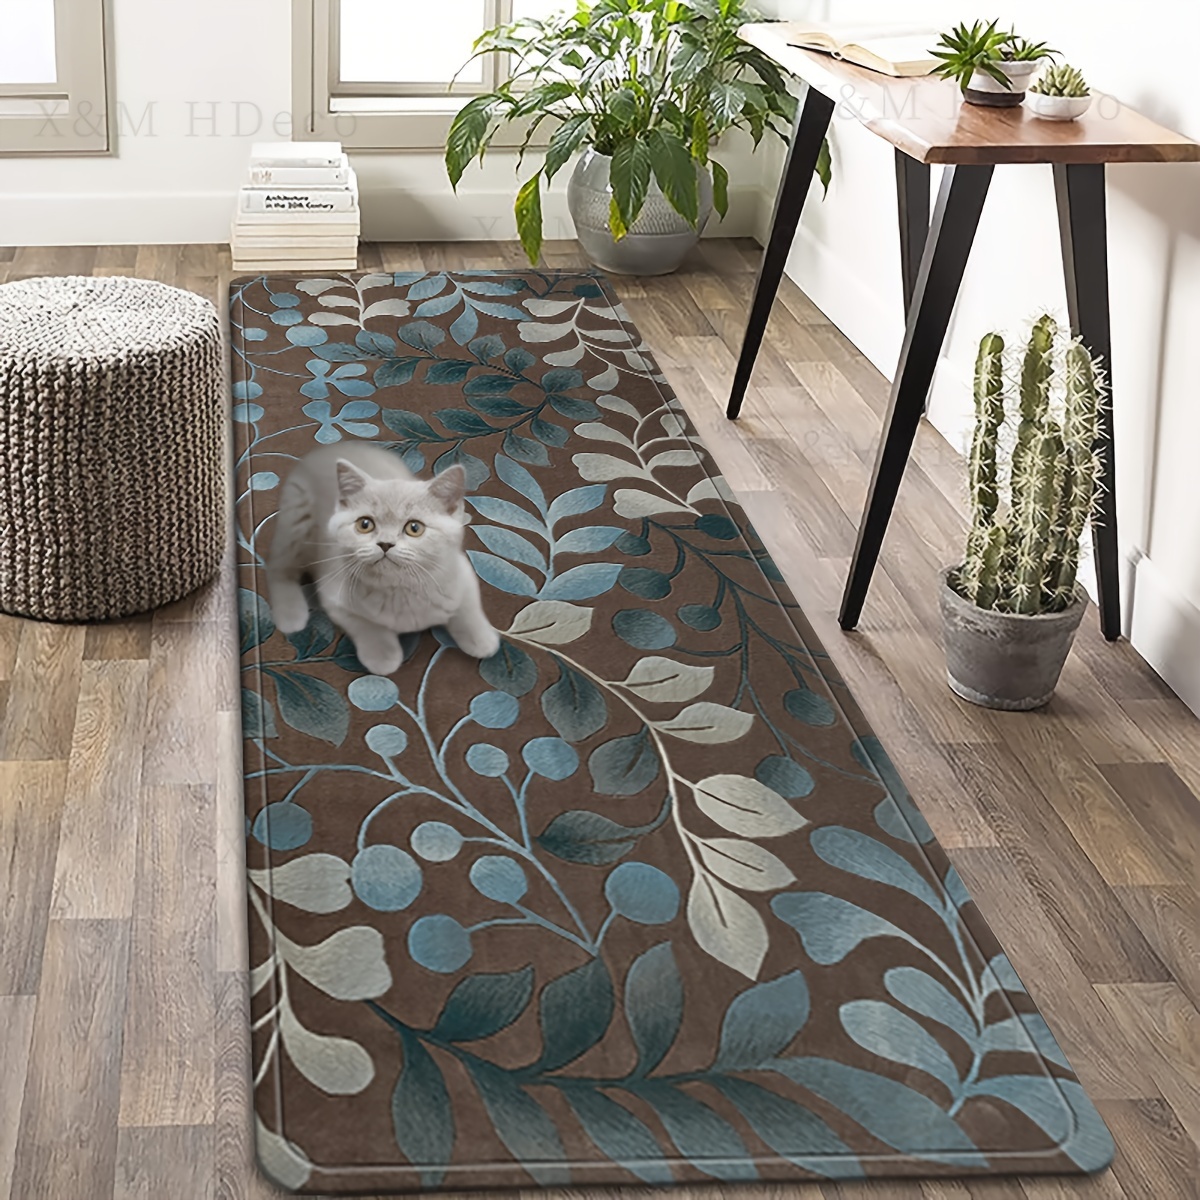 Home Area Runner Rug Pad Bright Fractal Mosaic Design Asymmetrical Colorful  Stained Glass Thickened Non Slip Mats Doormat Entry Rug Floor Carpet for